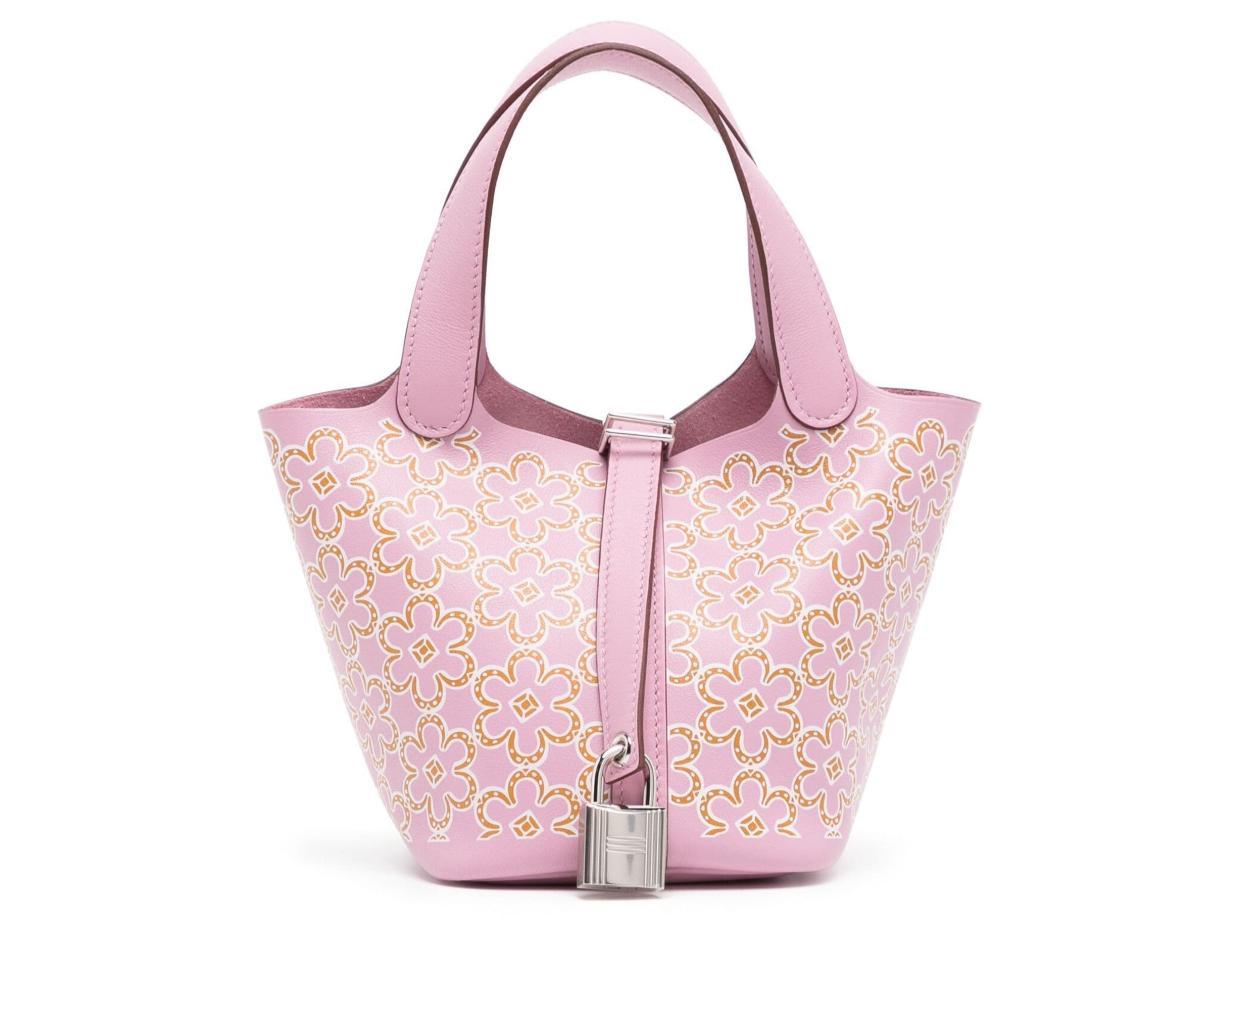 Hermes- lucky daisy micro picotin pink